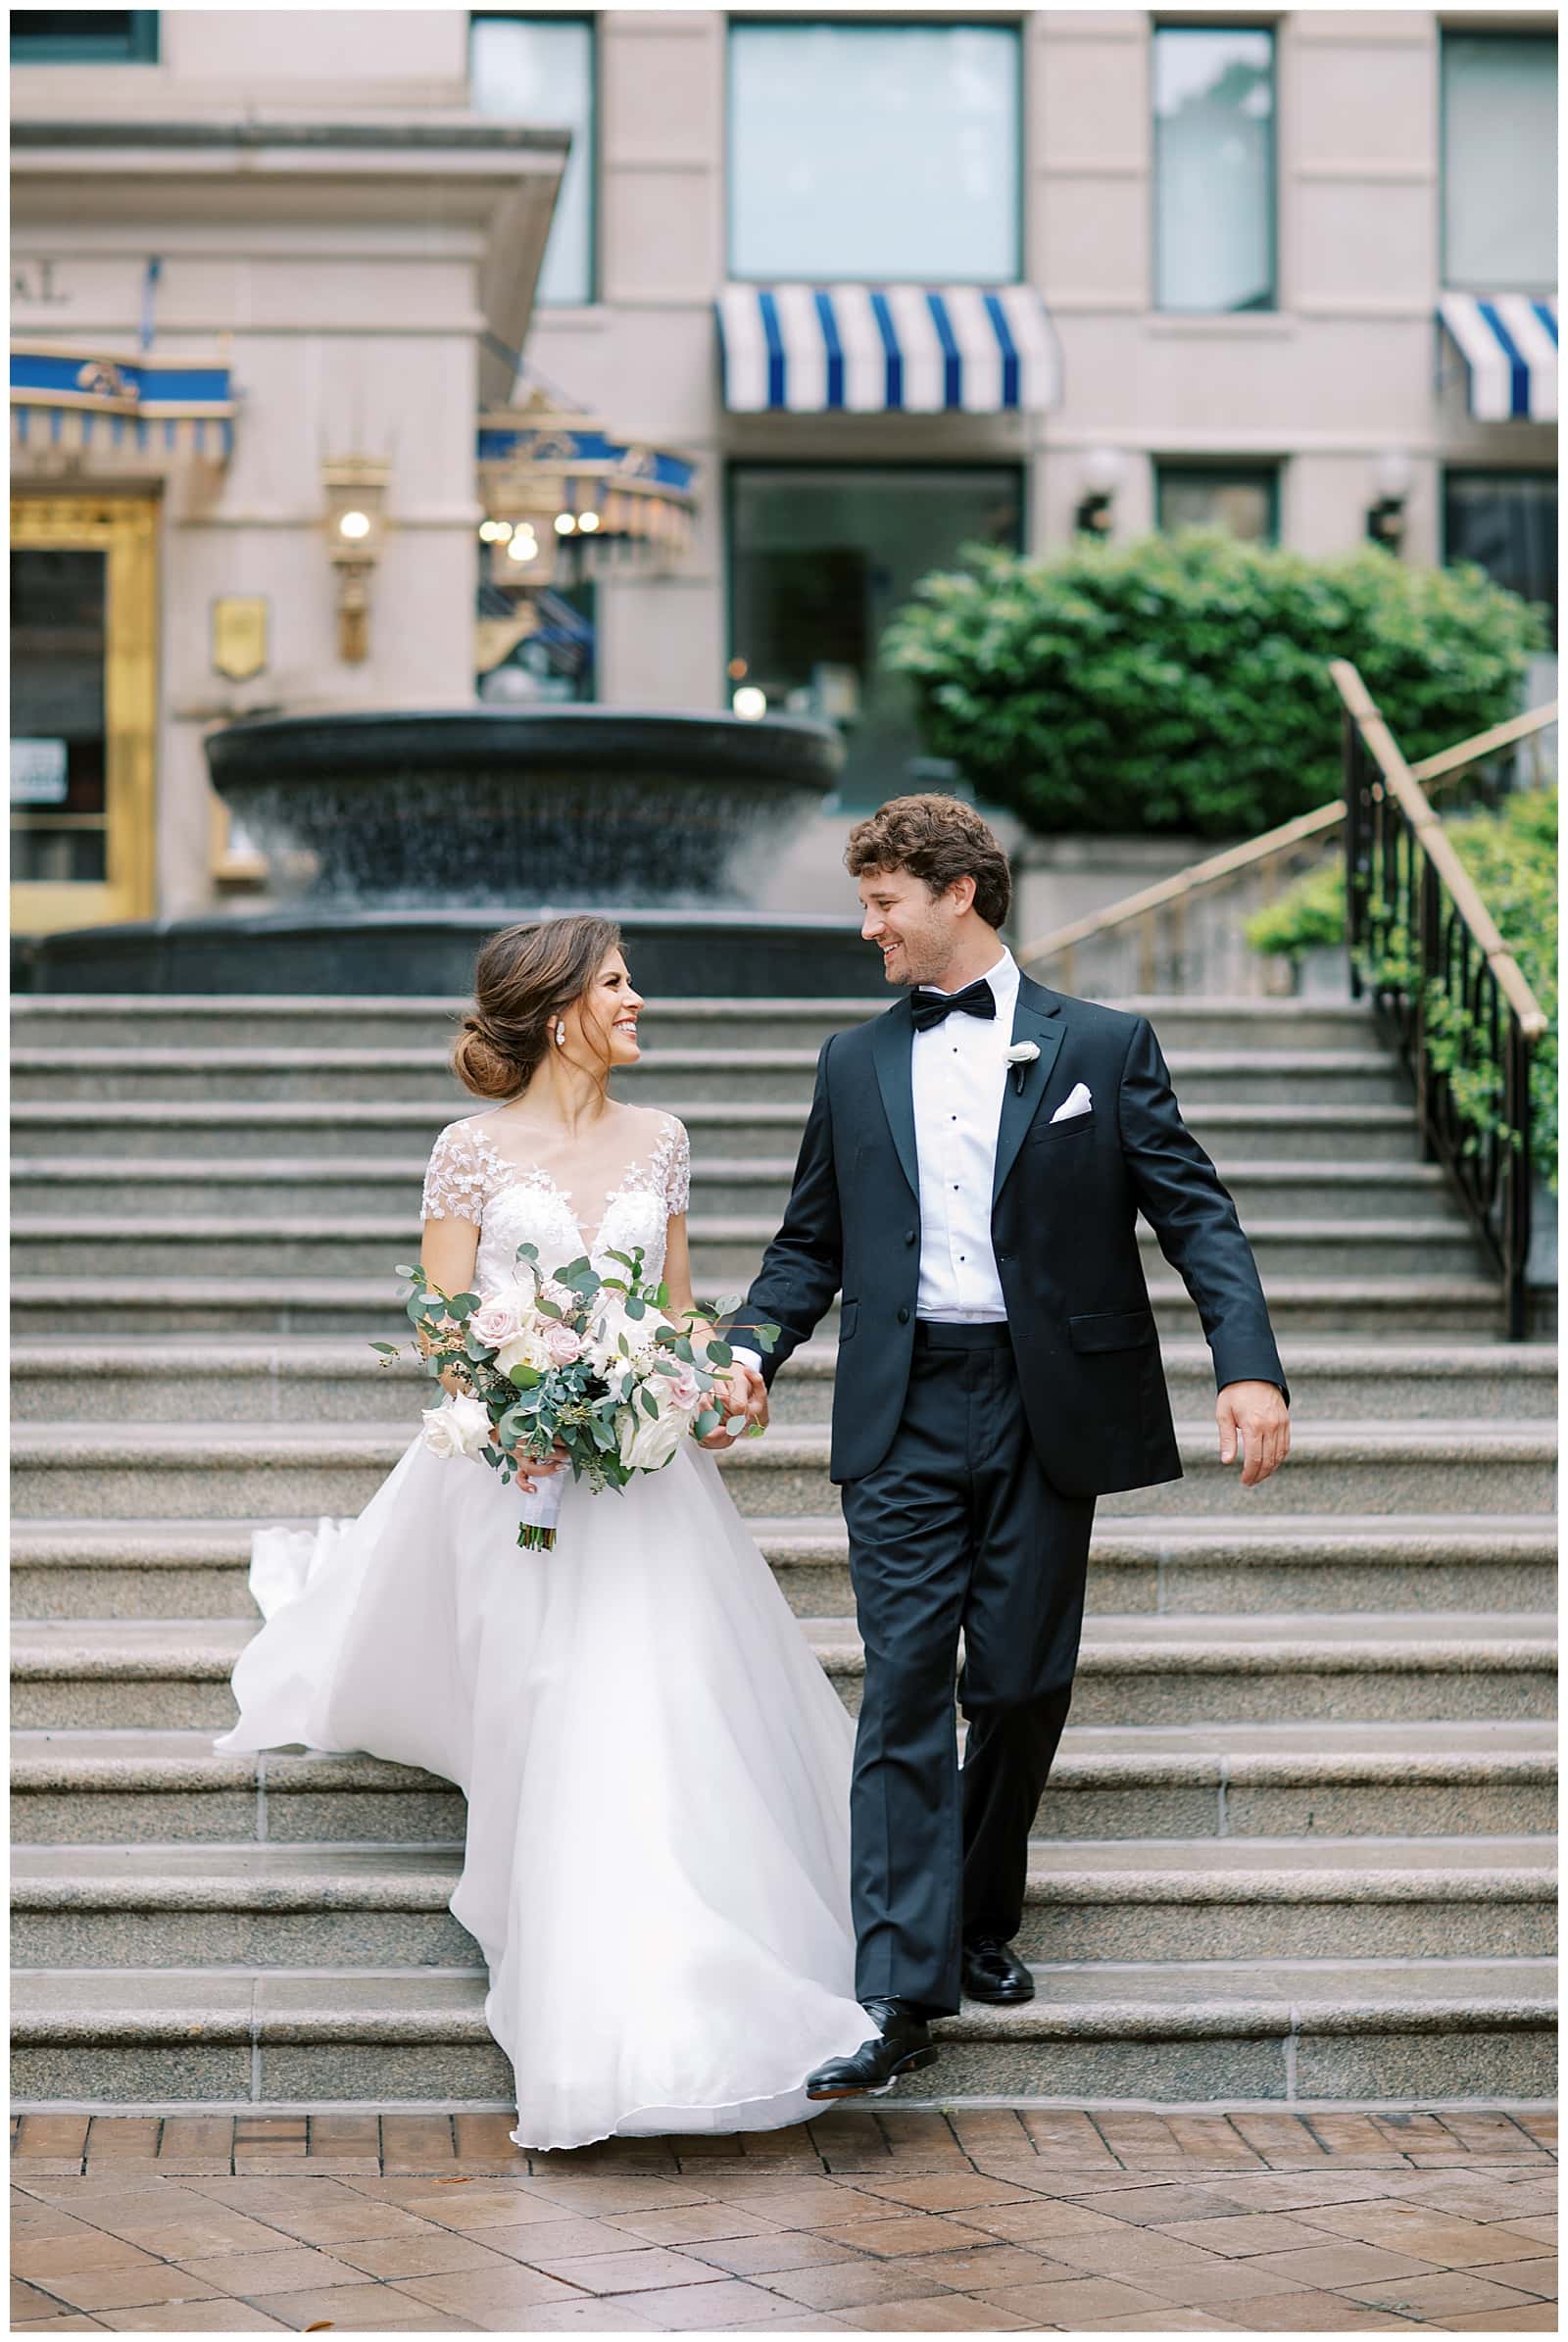 A Young Brown haired woman in a white wedding dress holding a large floral bouquet holds the hand of a young man in a black tuxedo smiling as they walk down the steps outside of the Willard Hotel DC